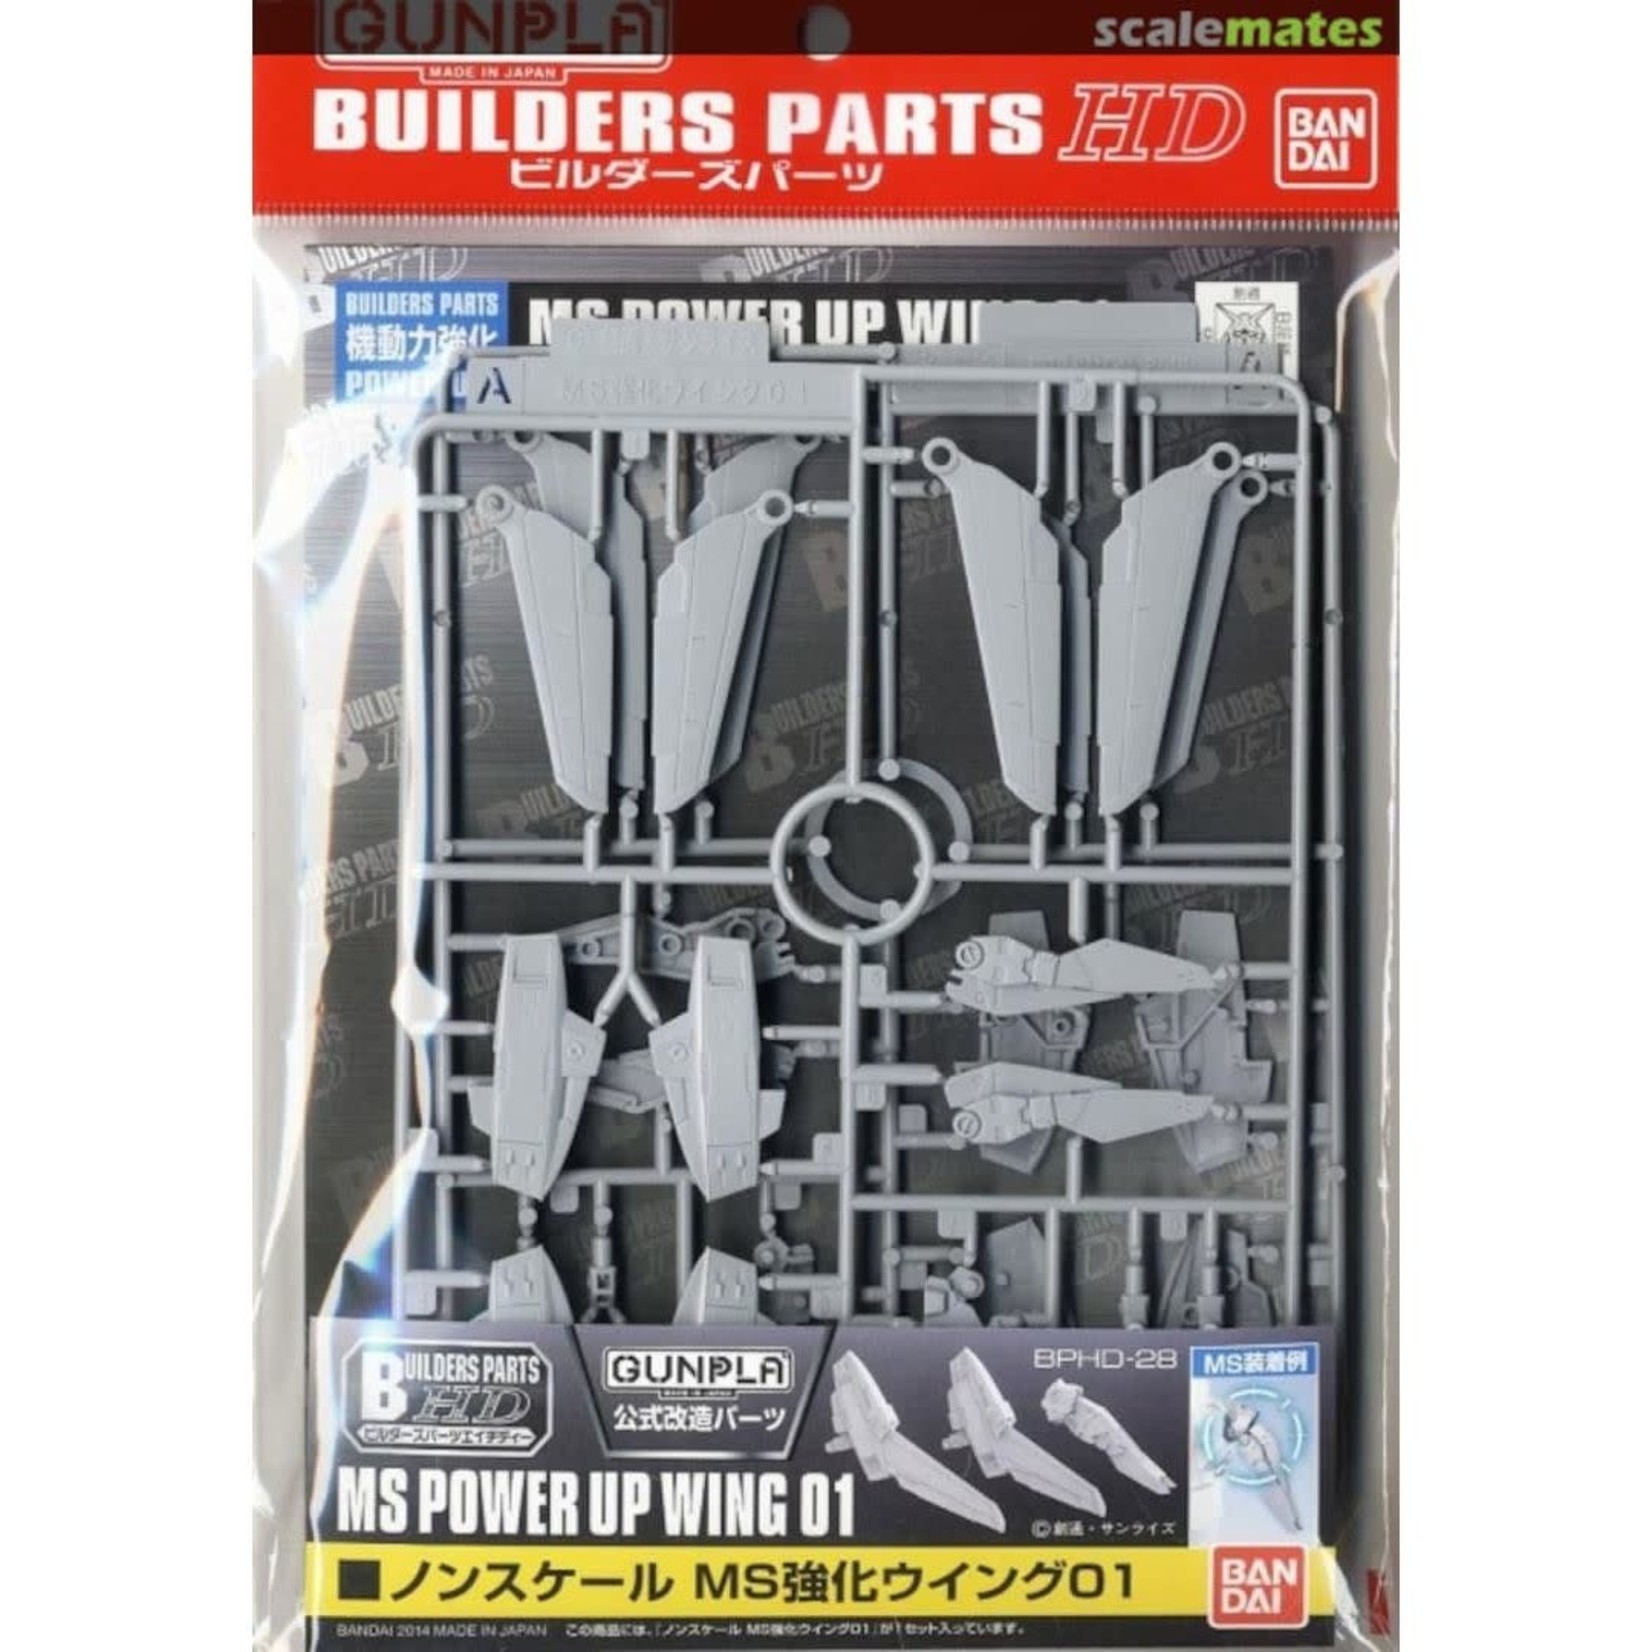 BANDAI BUILDERS PARTS HD - MS POWER UP WING 01